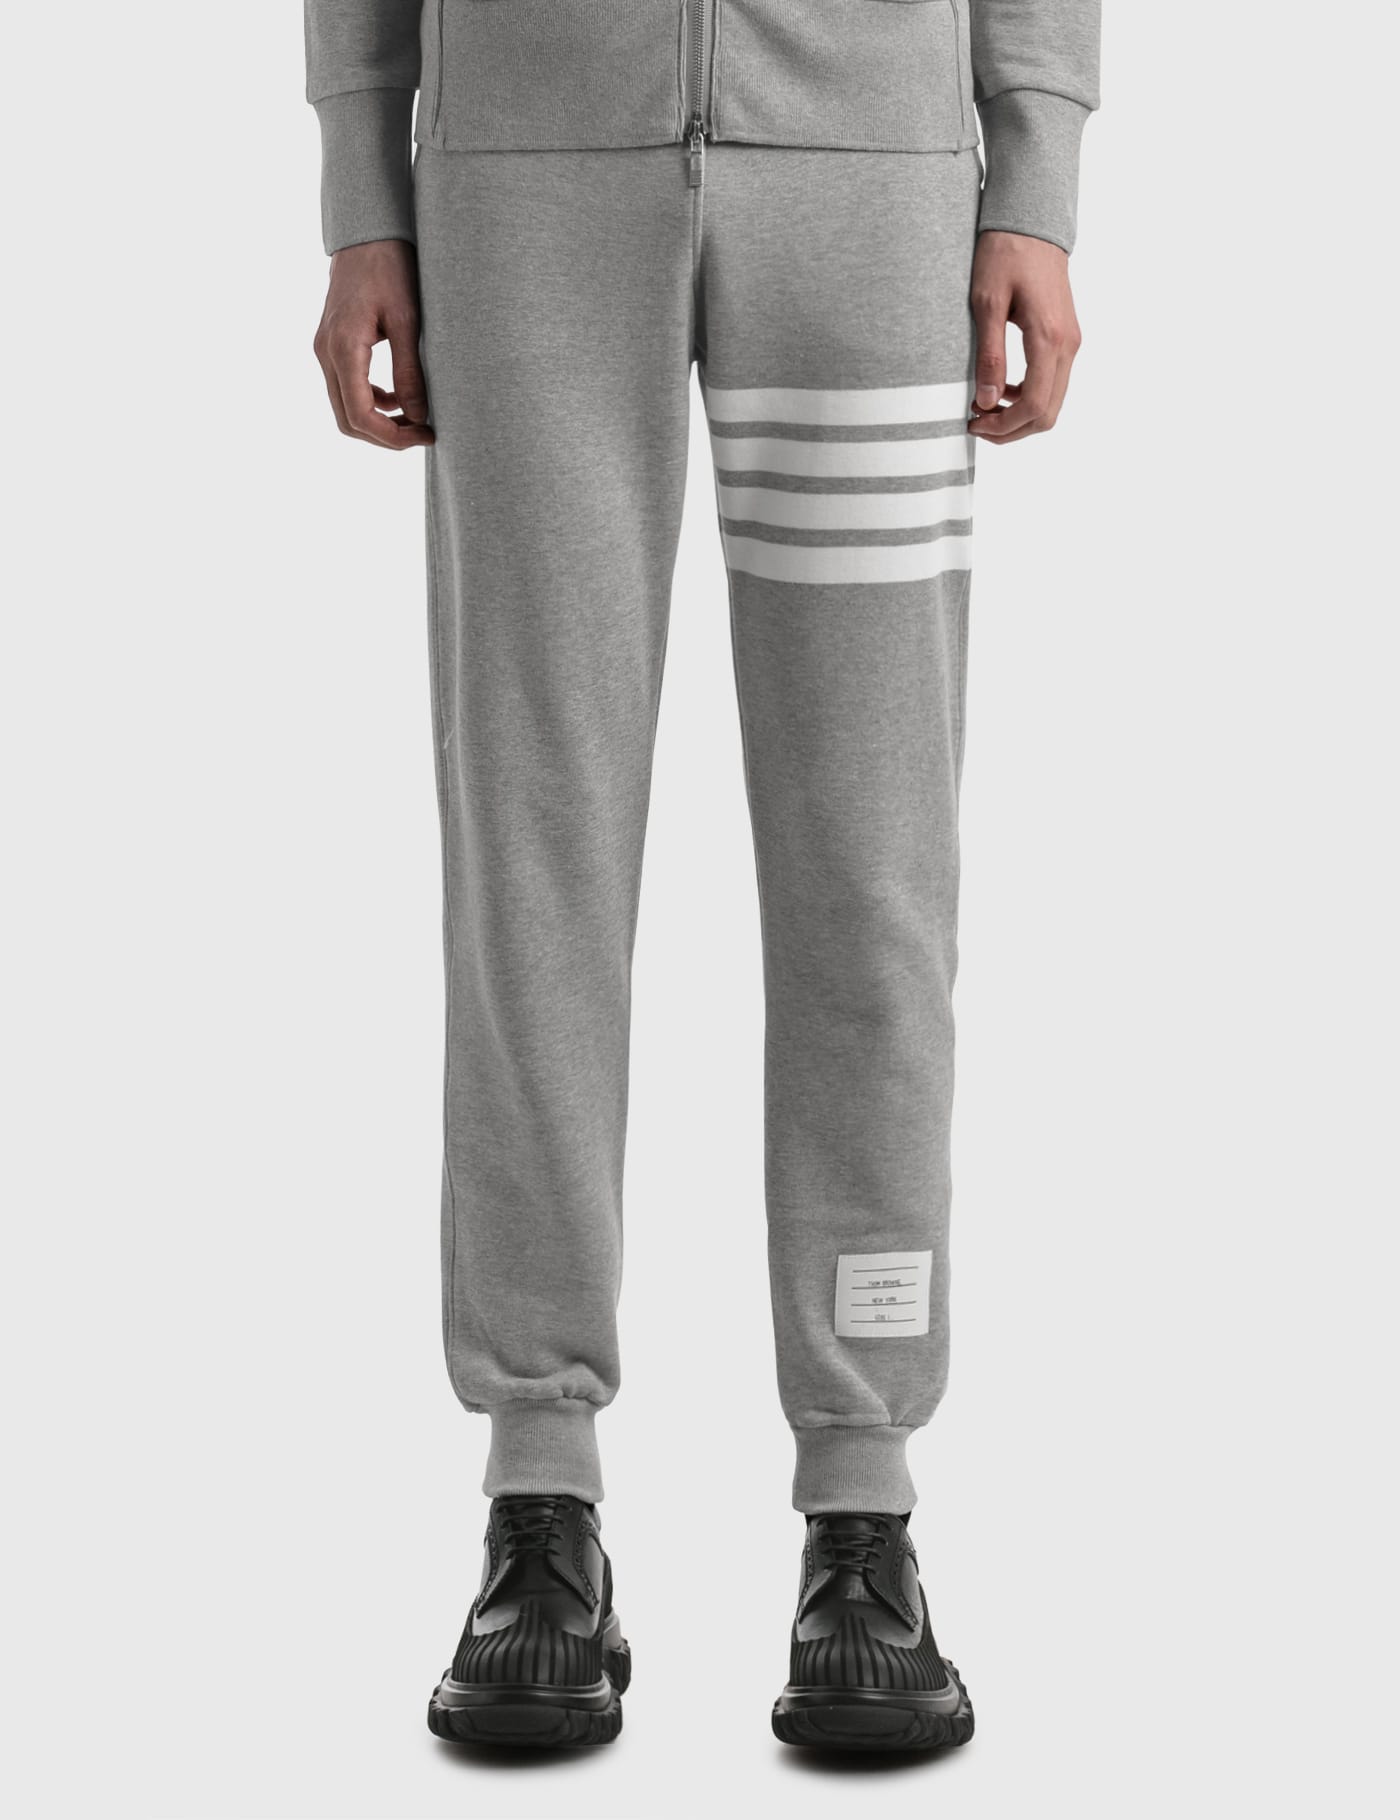 Thom Browne - Classic Sweatpants With Engineered 4 Bar | HBX - Globally  Curated Fashion and Lifestyle by Hypebeast